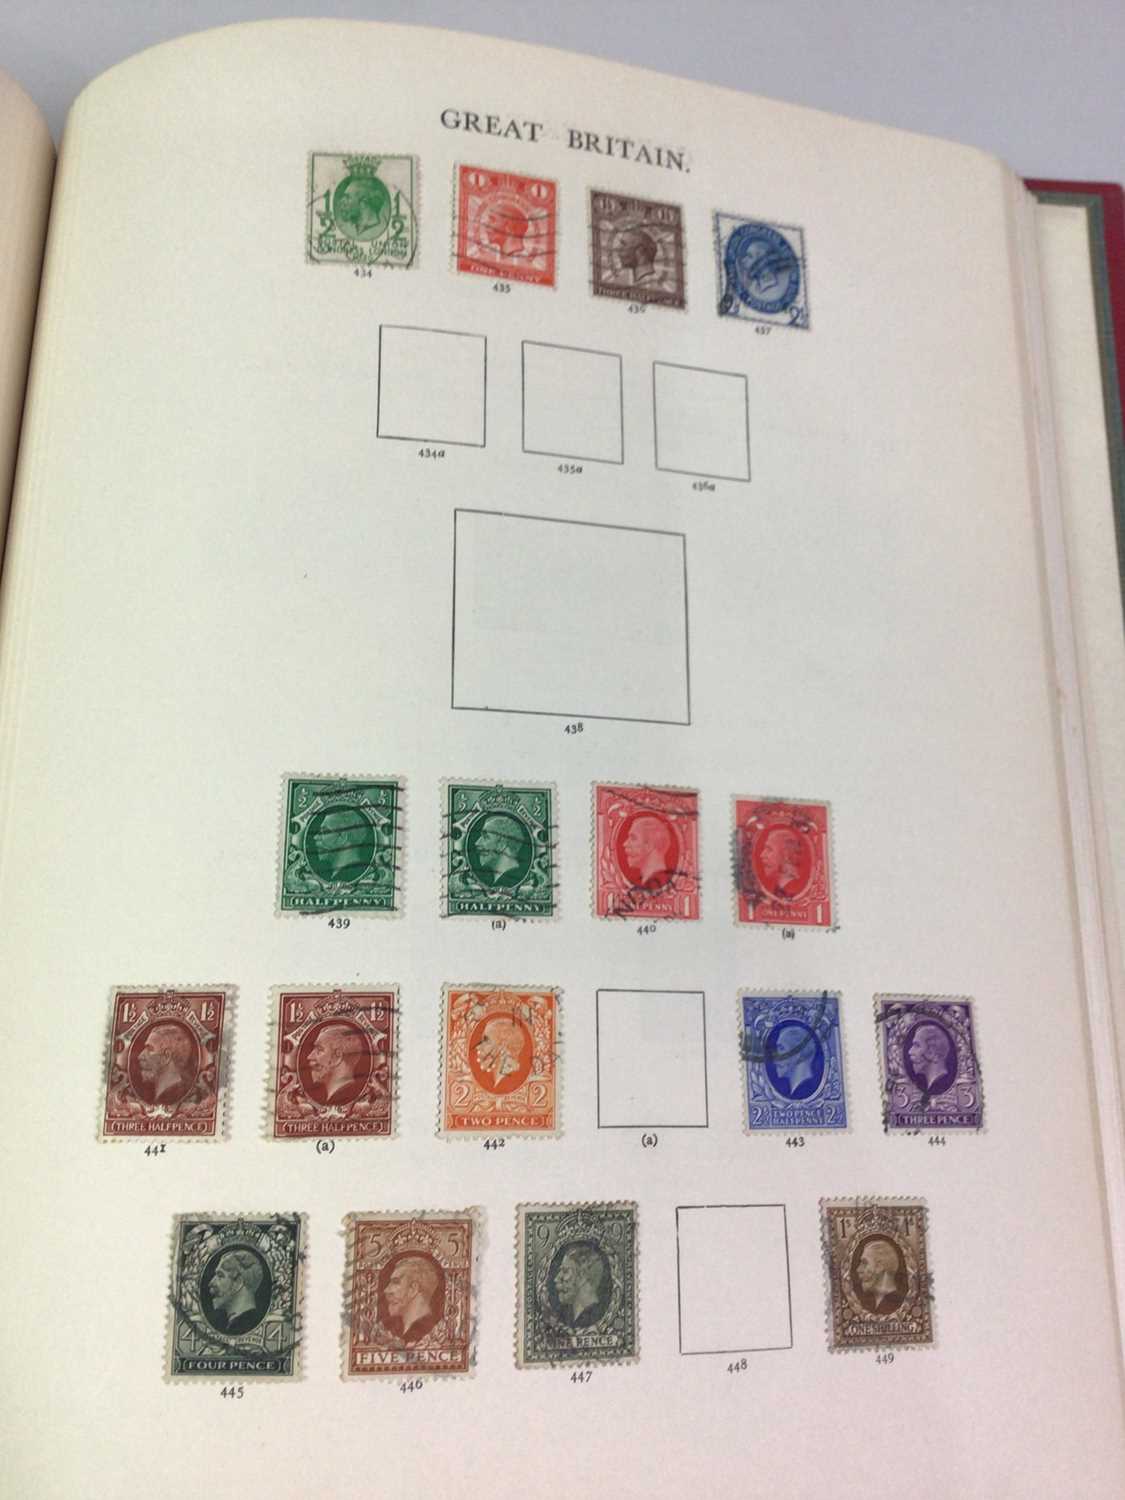 GROUP OF STAMPS, GREAT BRITAIN AND WORLDWIDE, INCLUDING A PENNY RED AND A PENNY BLACK - Image 5 of 6